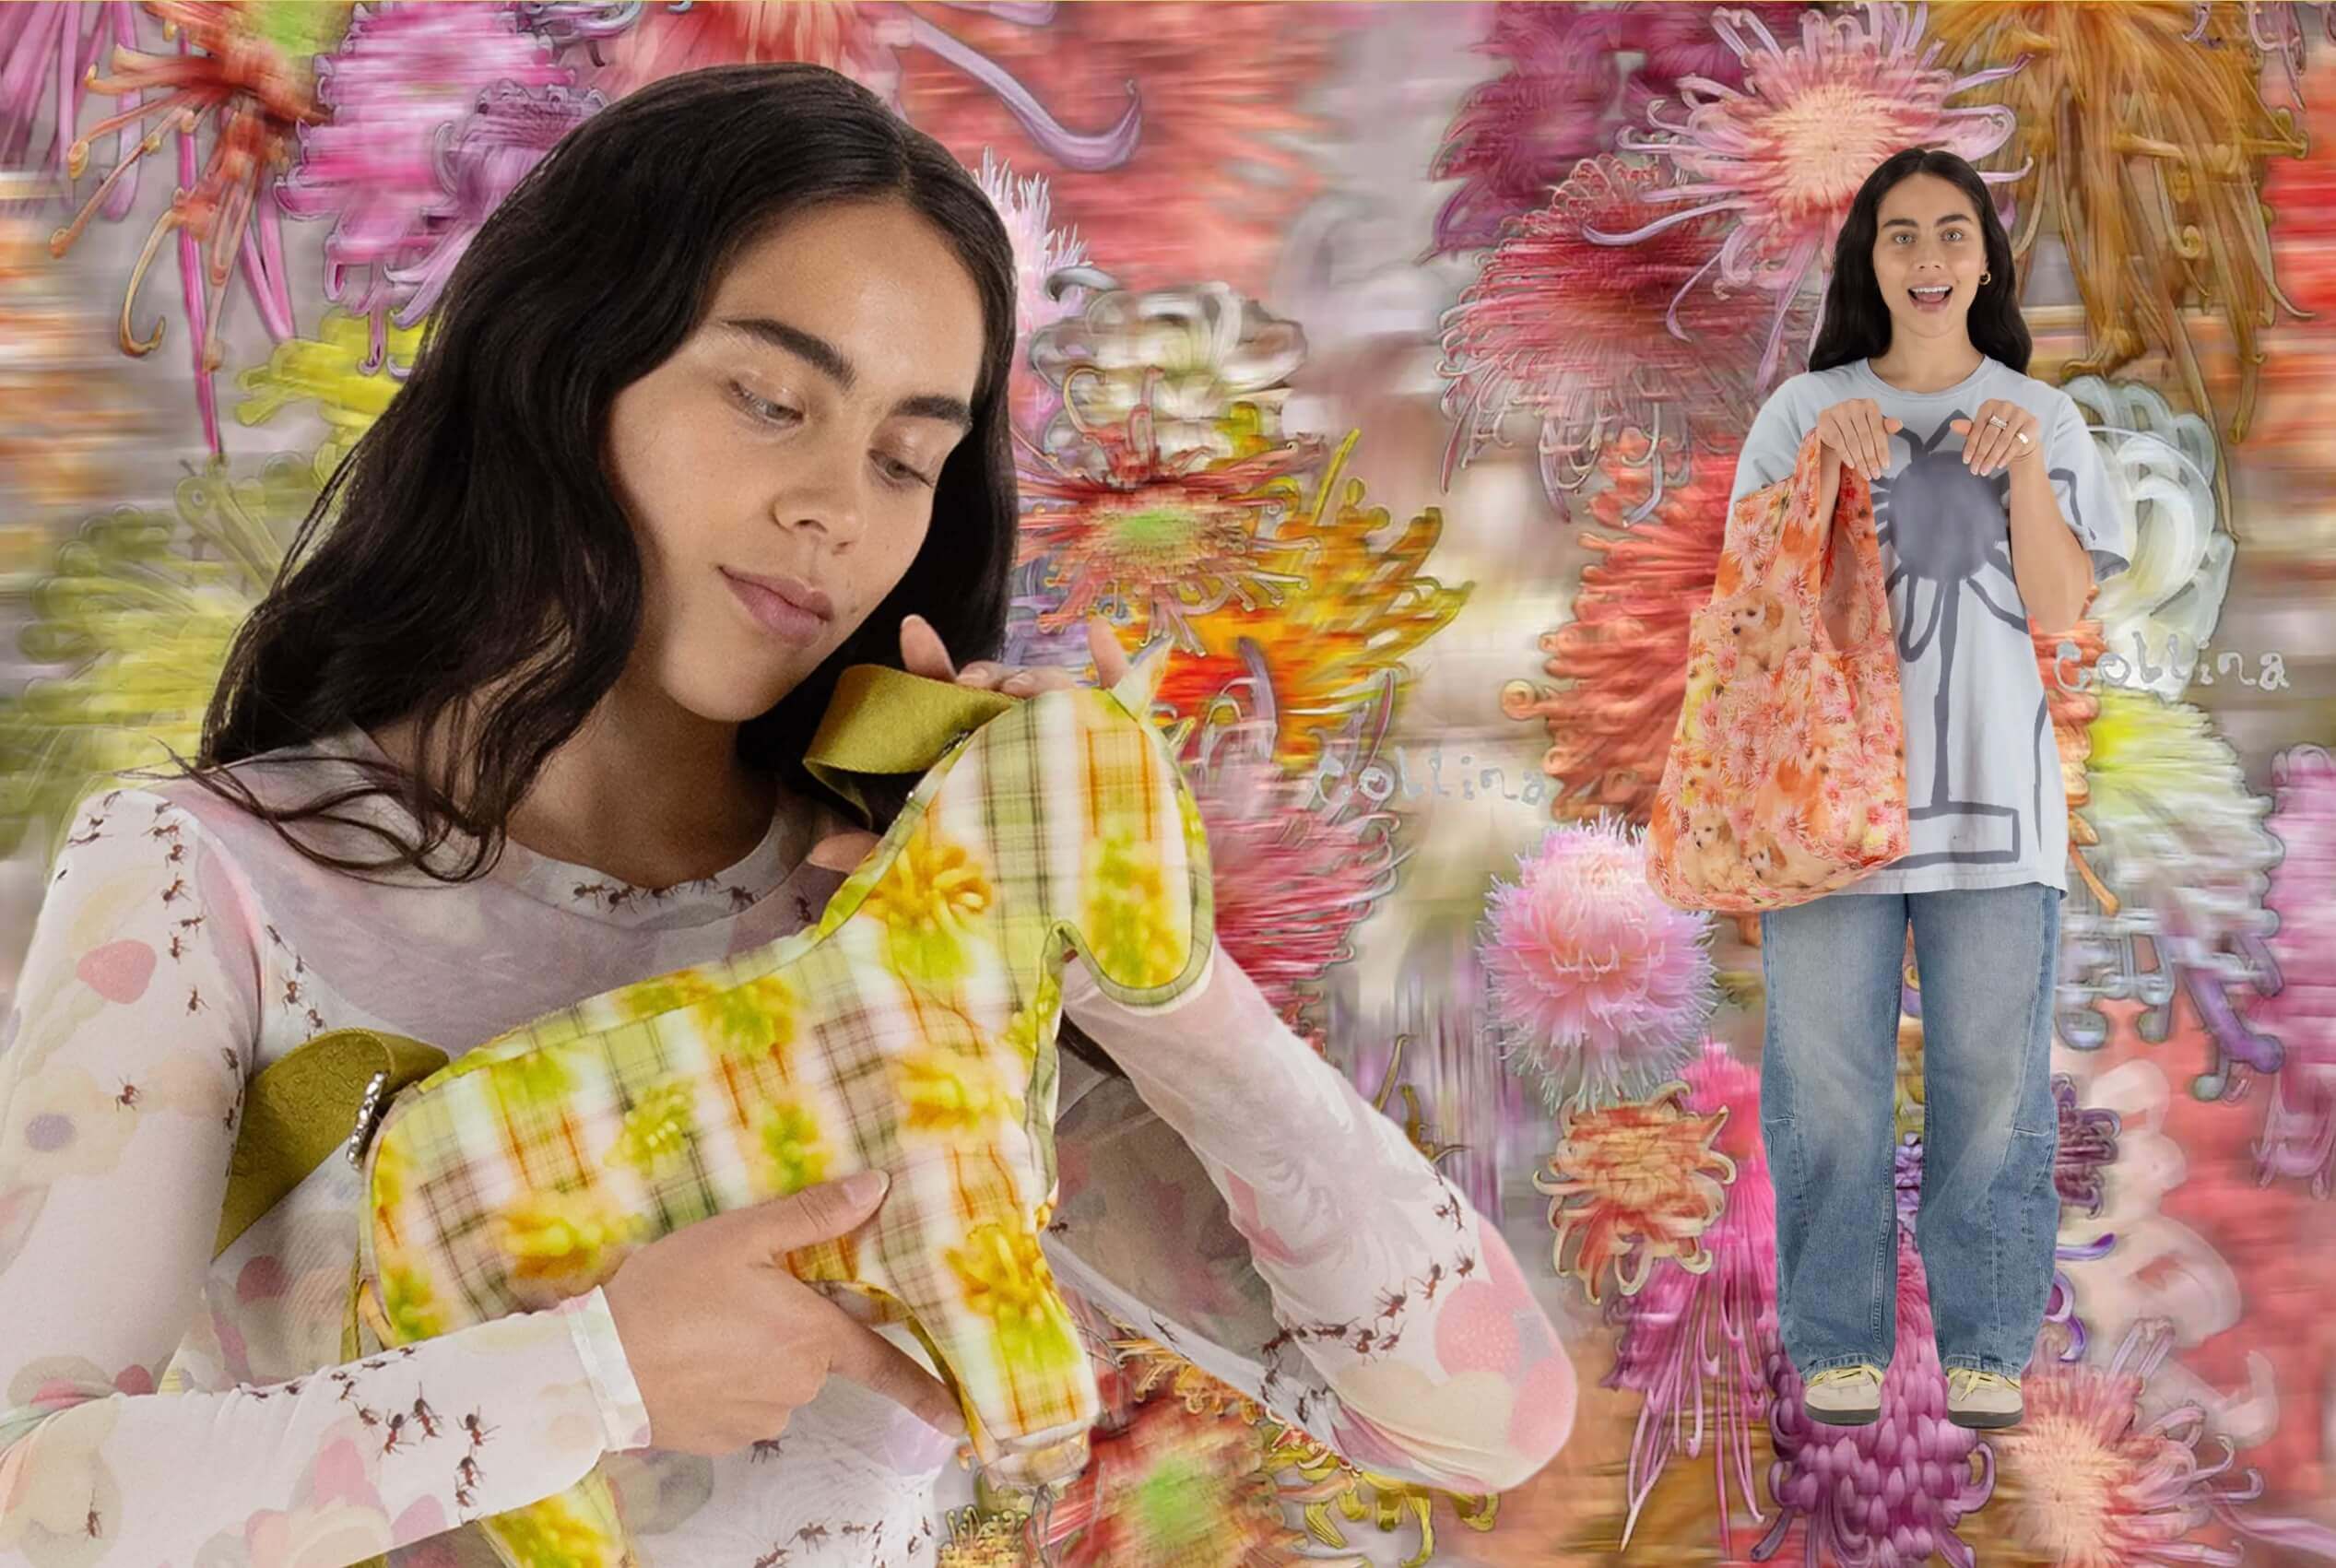 Dreamy images of model with Collina Strada’s designs for Baggu 